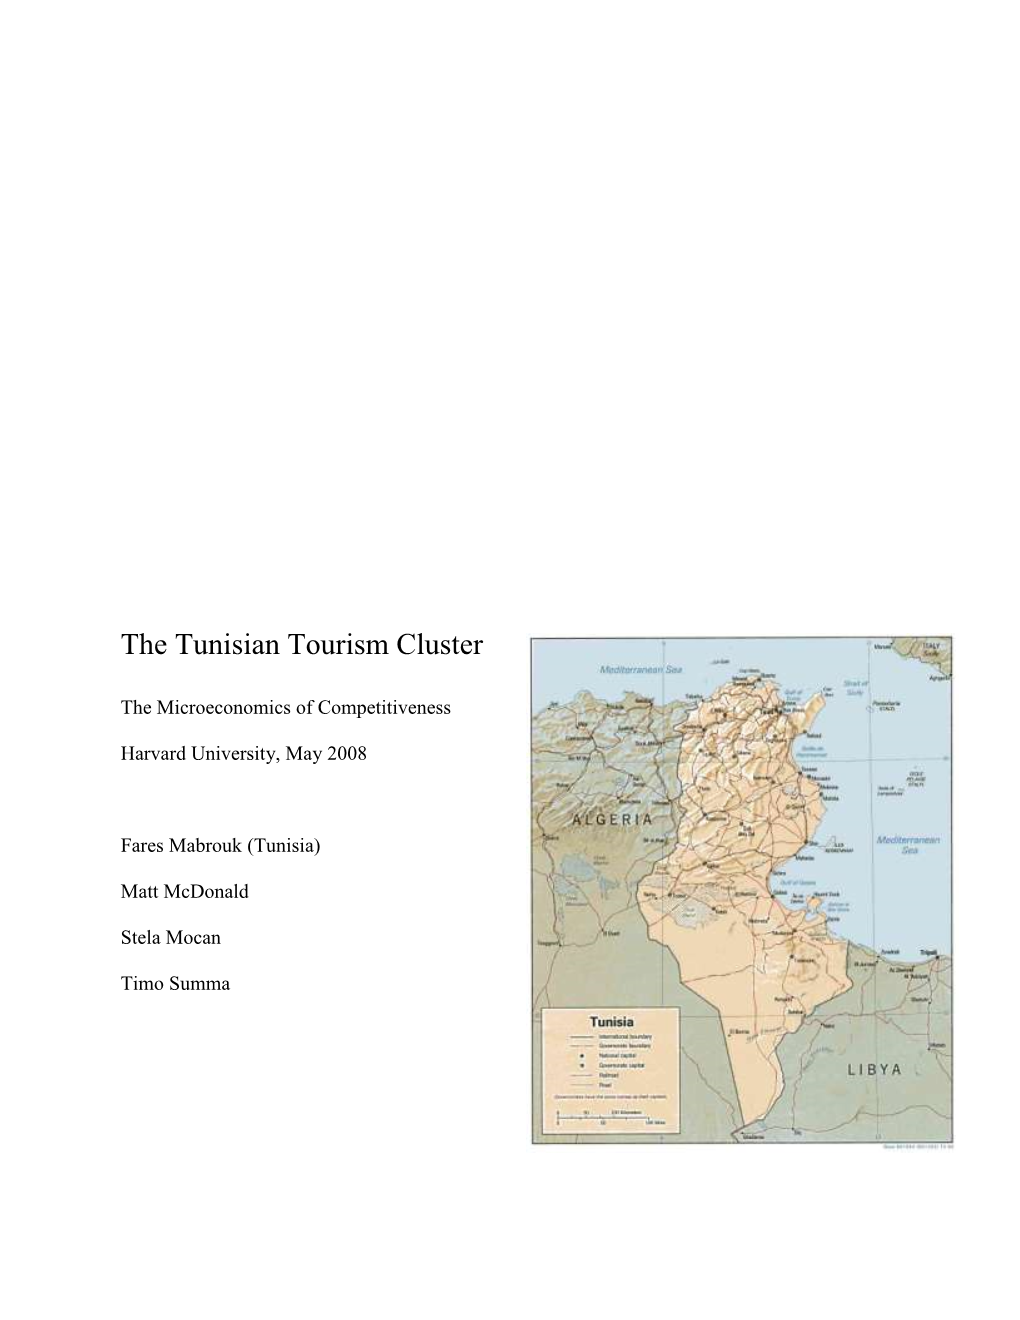 The Tunisian Tourism Cluster